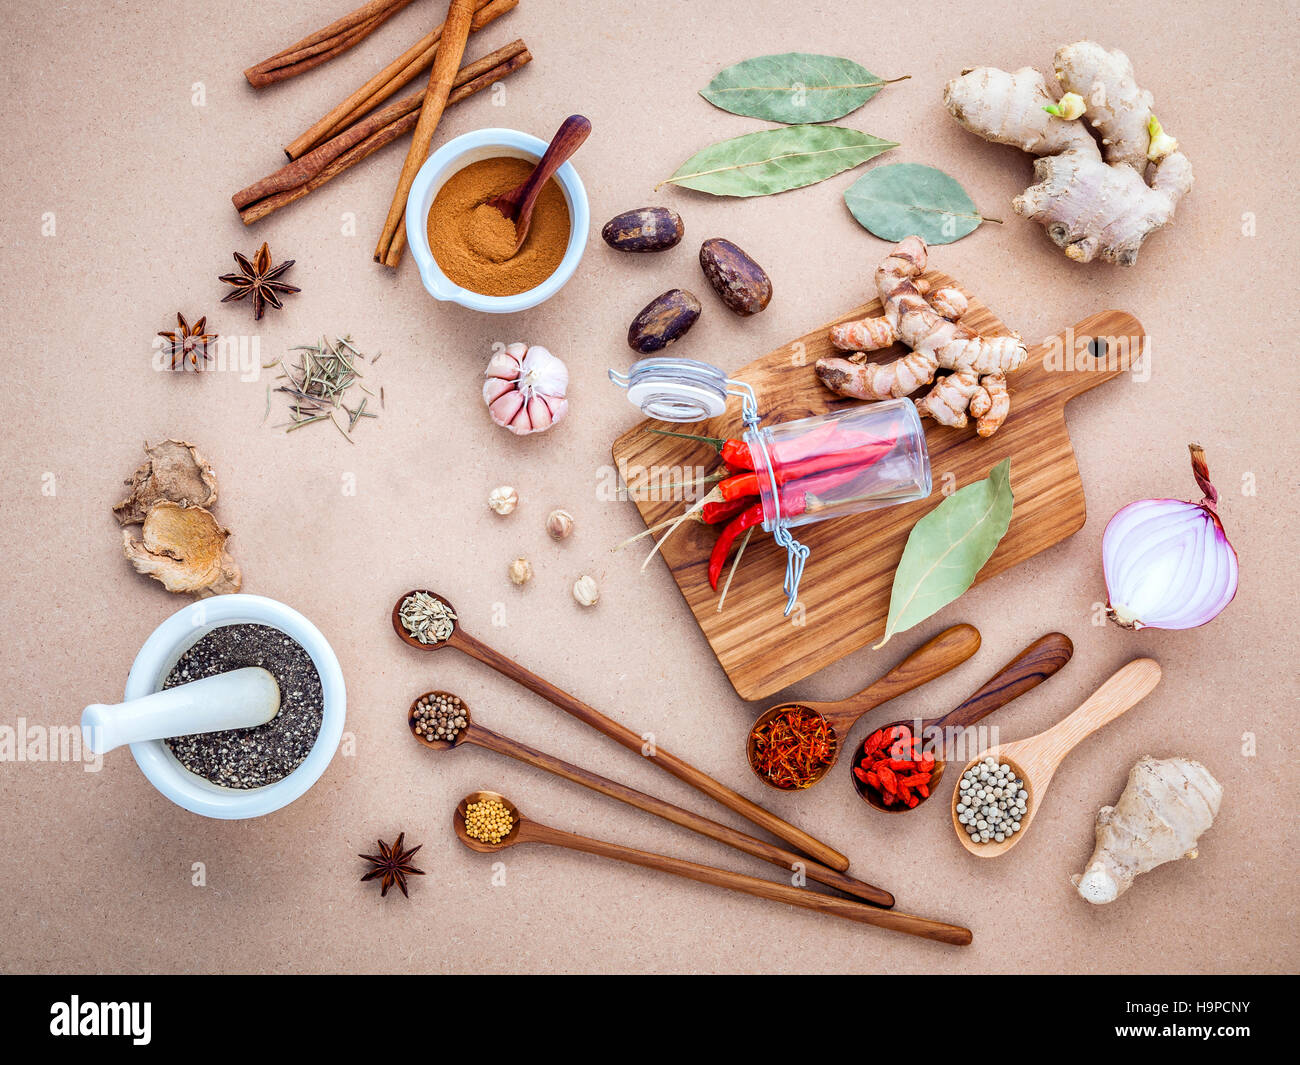 Mixed spices and herbs background cinnamon stick and cinnamon po Stock Photo